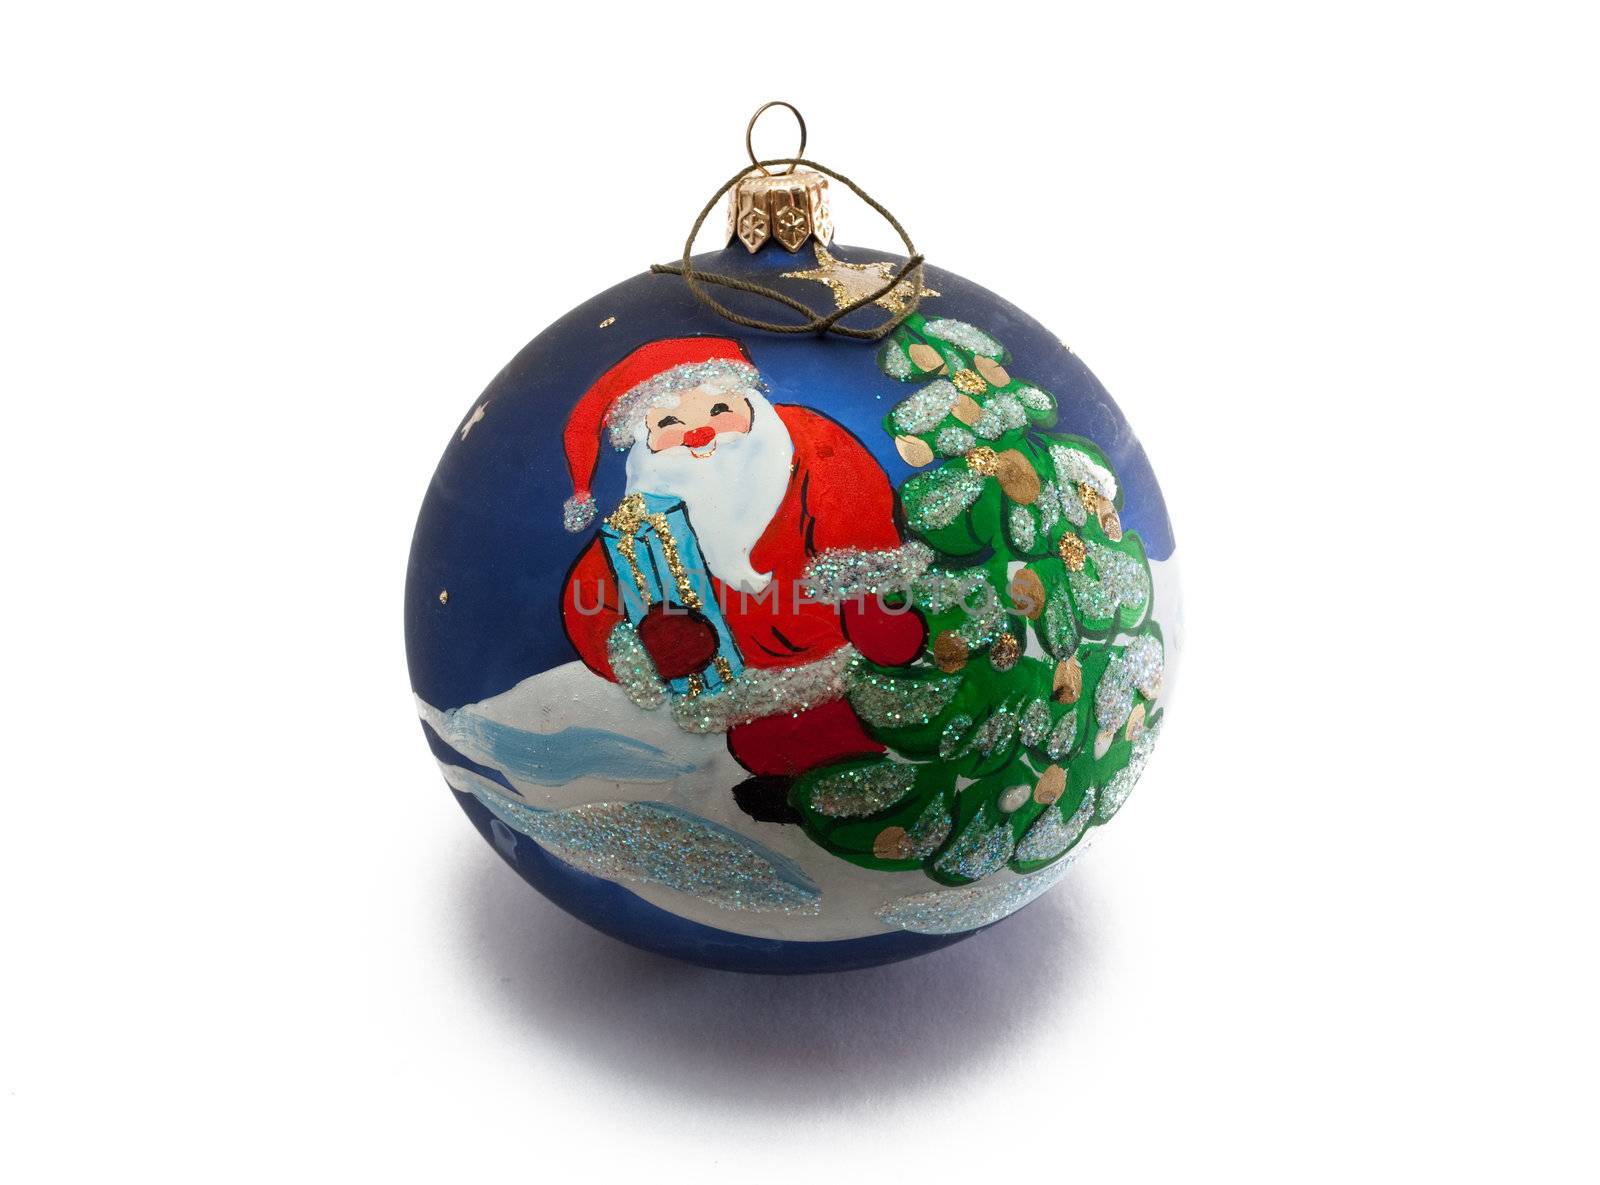 Christmas ornament with Santa Claus and Christmas tree represented on it